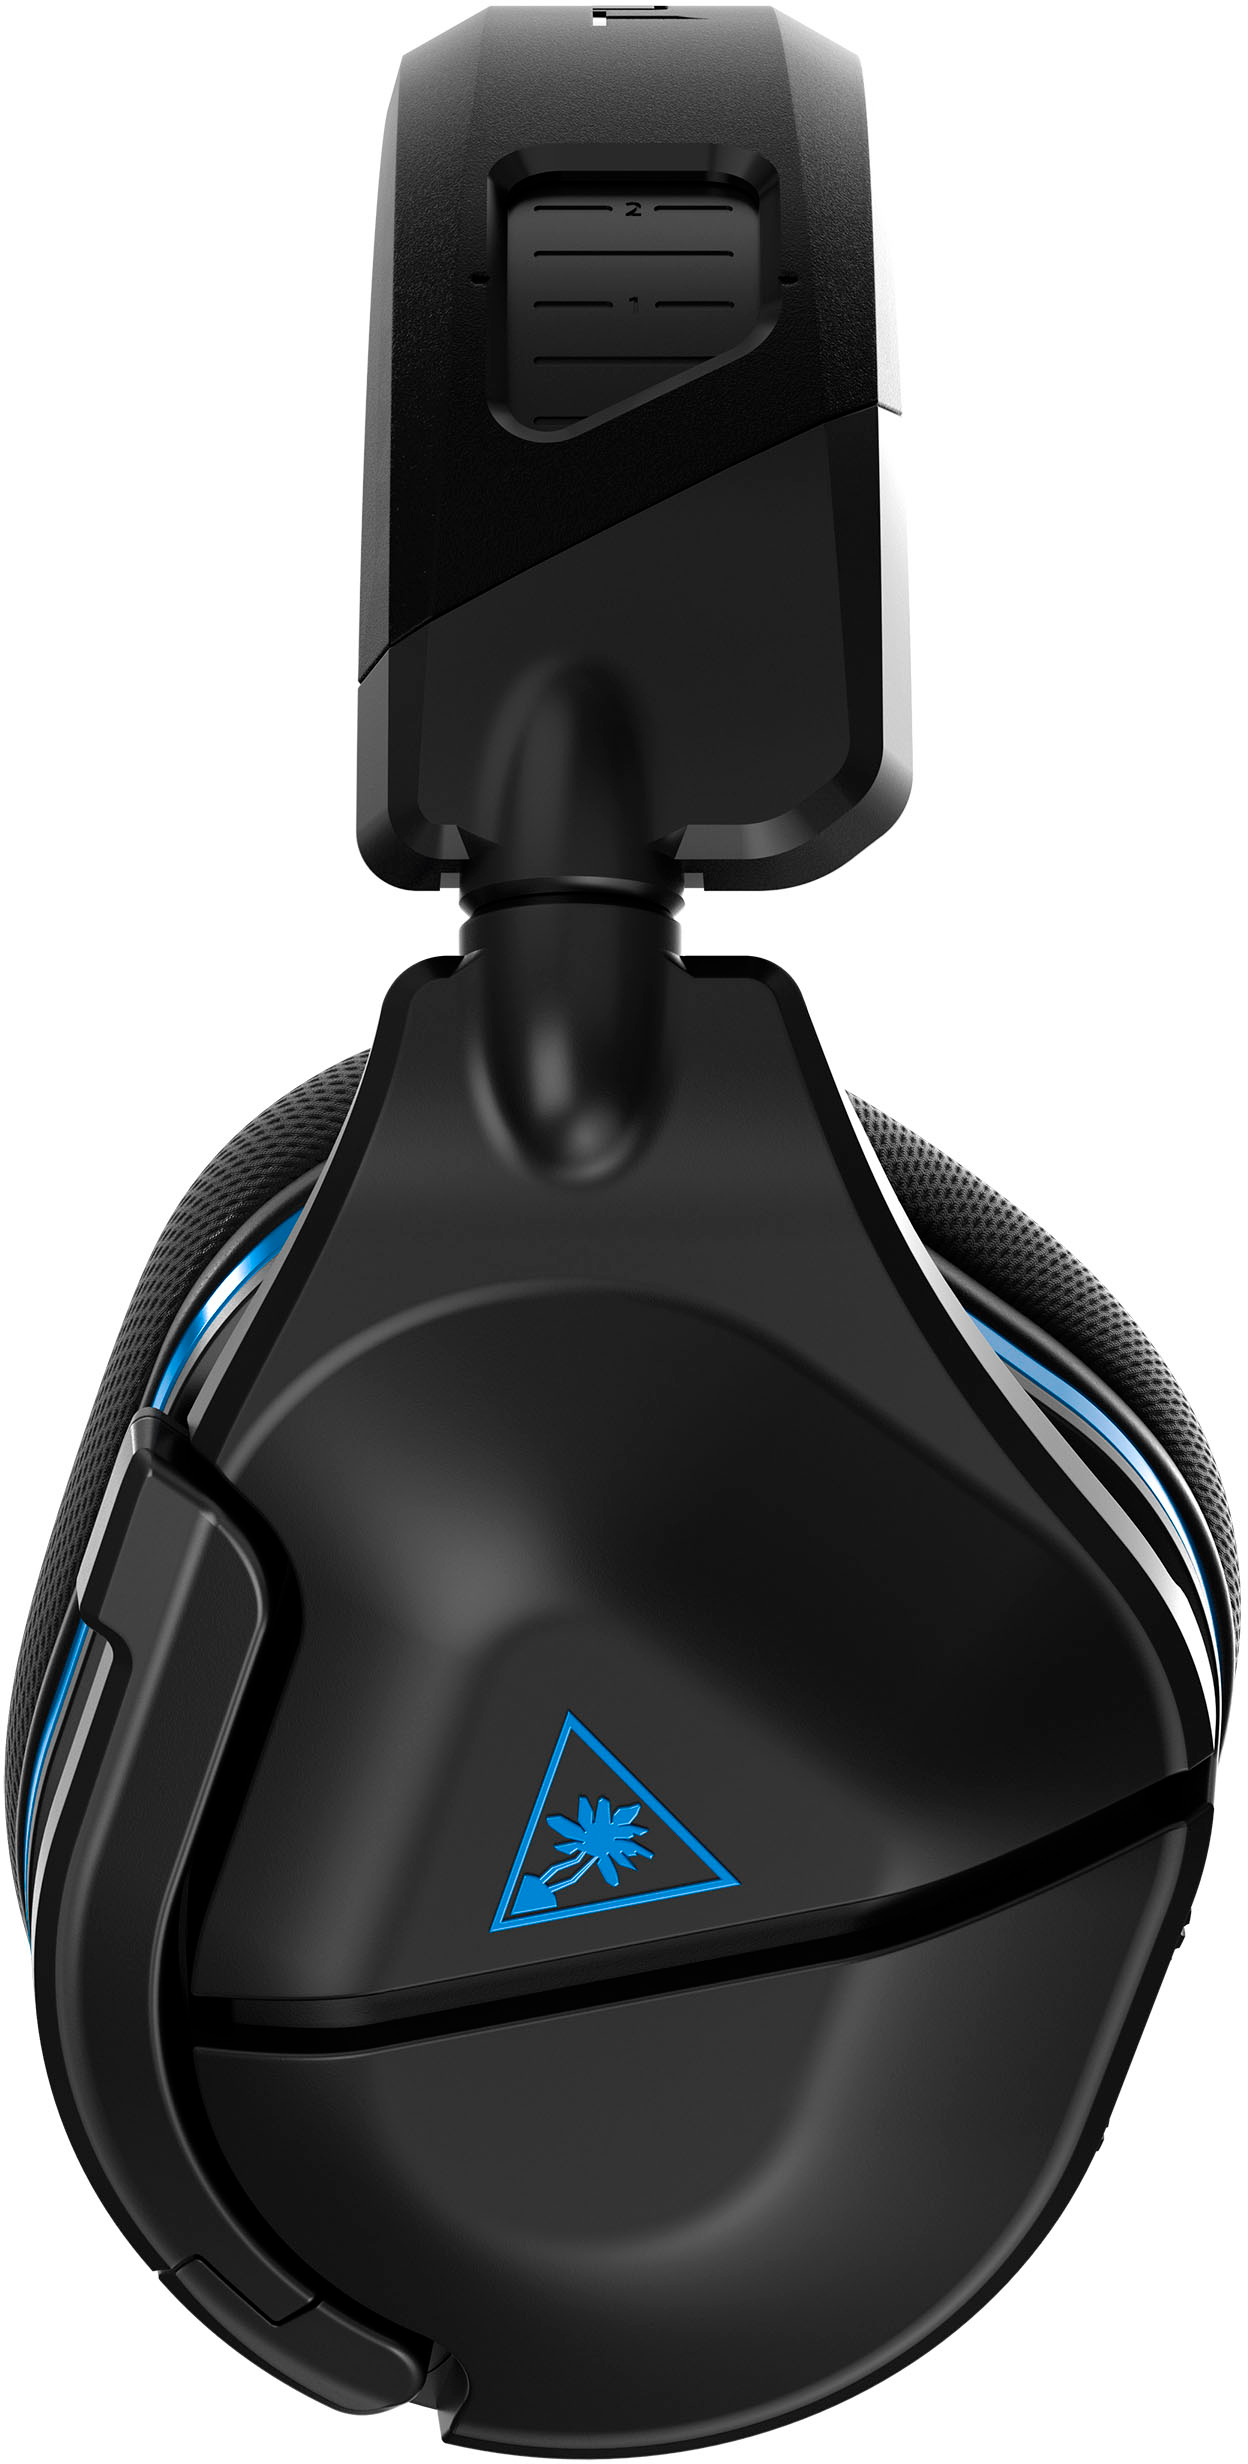 Turtle Beach Stealth 600 Gen 2 MAX Wireless Multiplatform Gaming Headset  for Xbox, PS5, PS4, Nintendo Switch and PC 48 Hour Battery Teal TBS-2382-05  - Best Buy